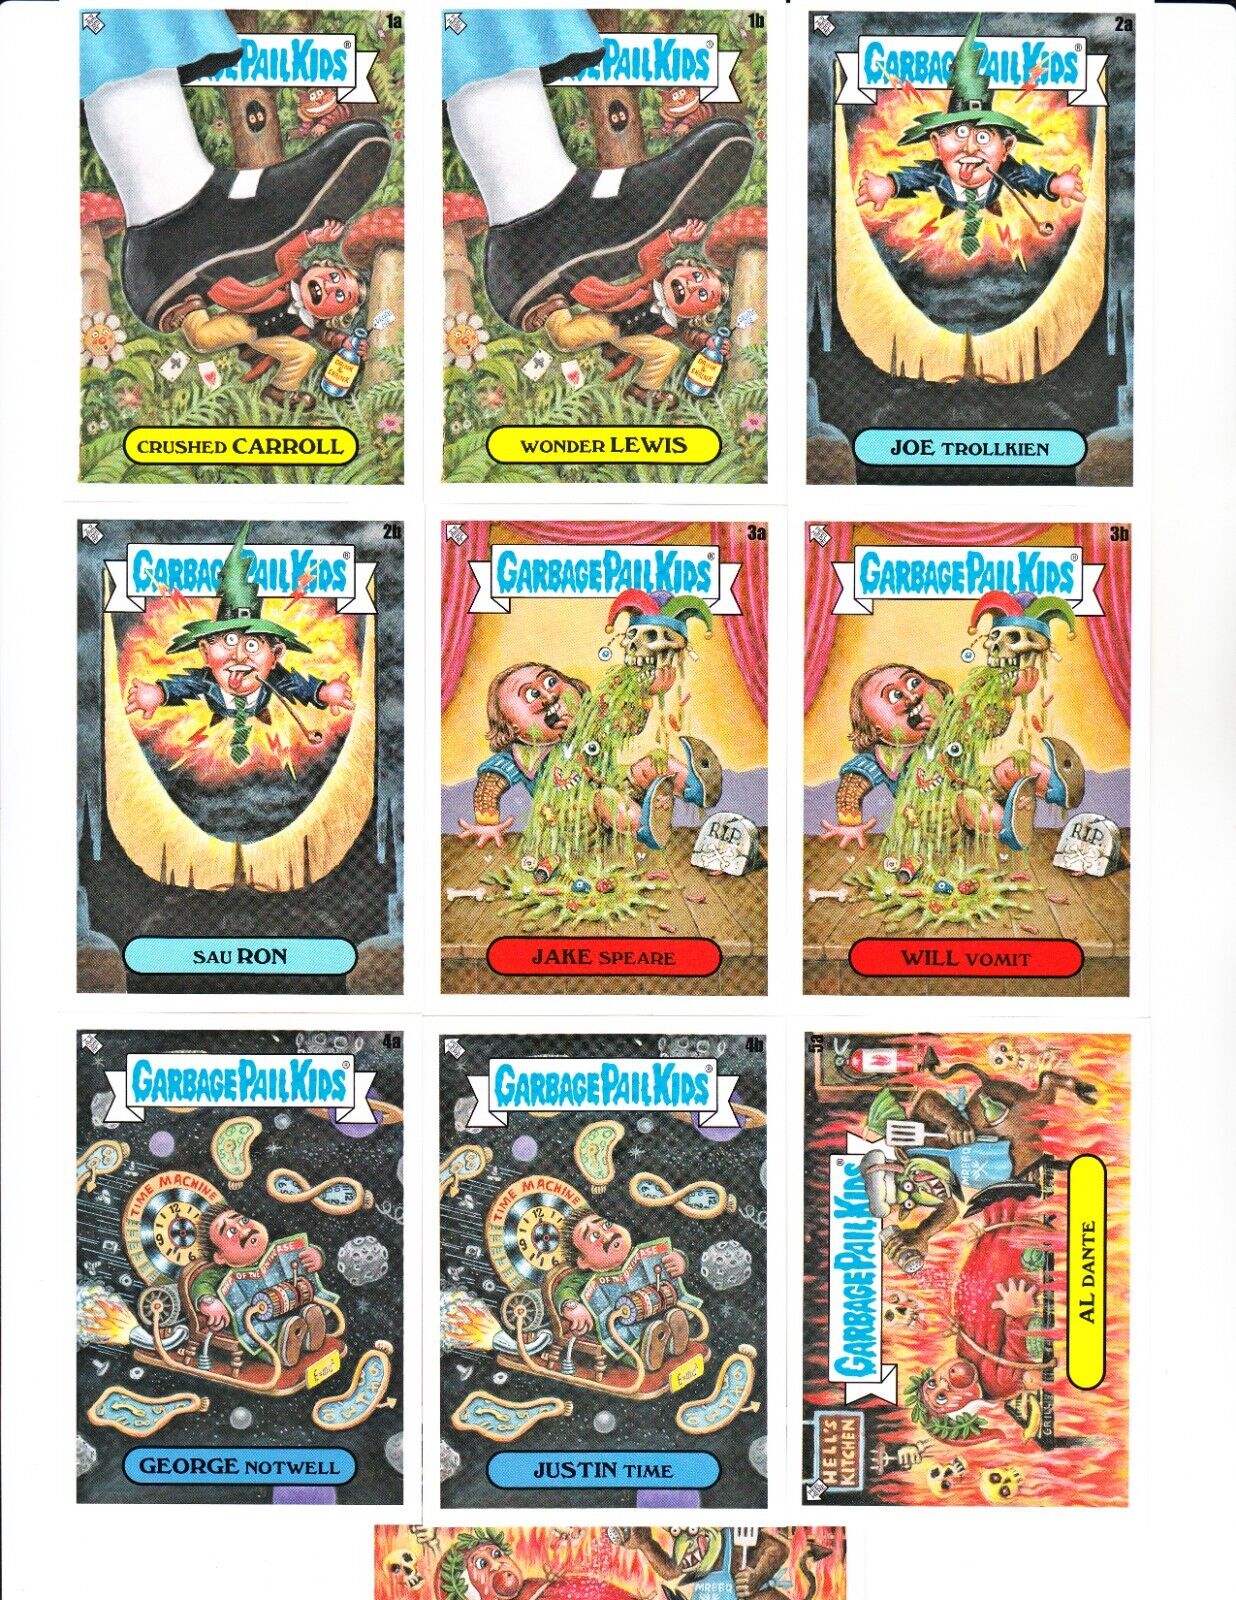 2022 SERIES 1 GARBAGE PAIL KIDS BOOKWORMS AUTHORS OF THEIR OWN MISFORTUNE SET 10